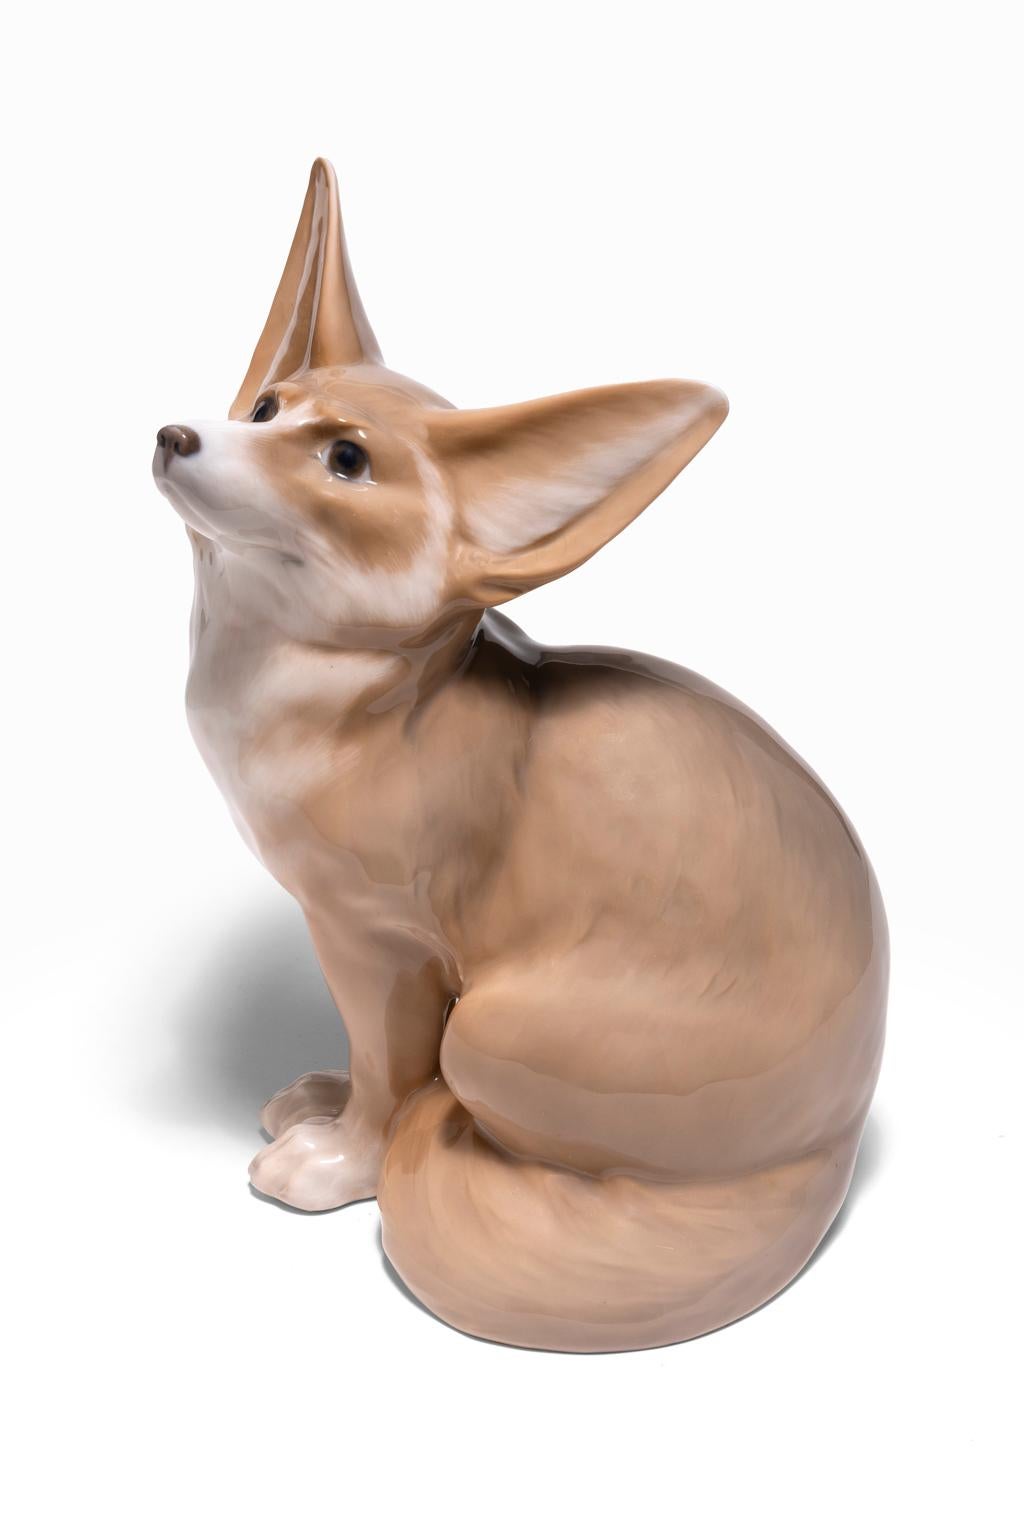 The Royal Copenhagen rare figure of a Desert Fox #1327 was modeled by Christian Thomsen in 1911 showing the large ears and substantial tail. It is considered one of the best of Copenhagen.

Christian Thomsen (1860 - 1921) was a Danish sculptor. He